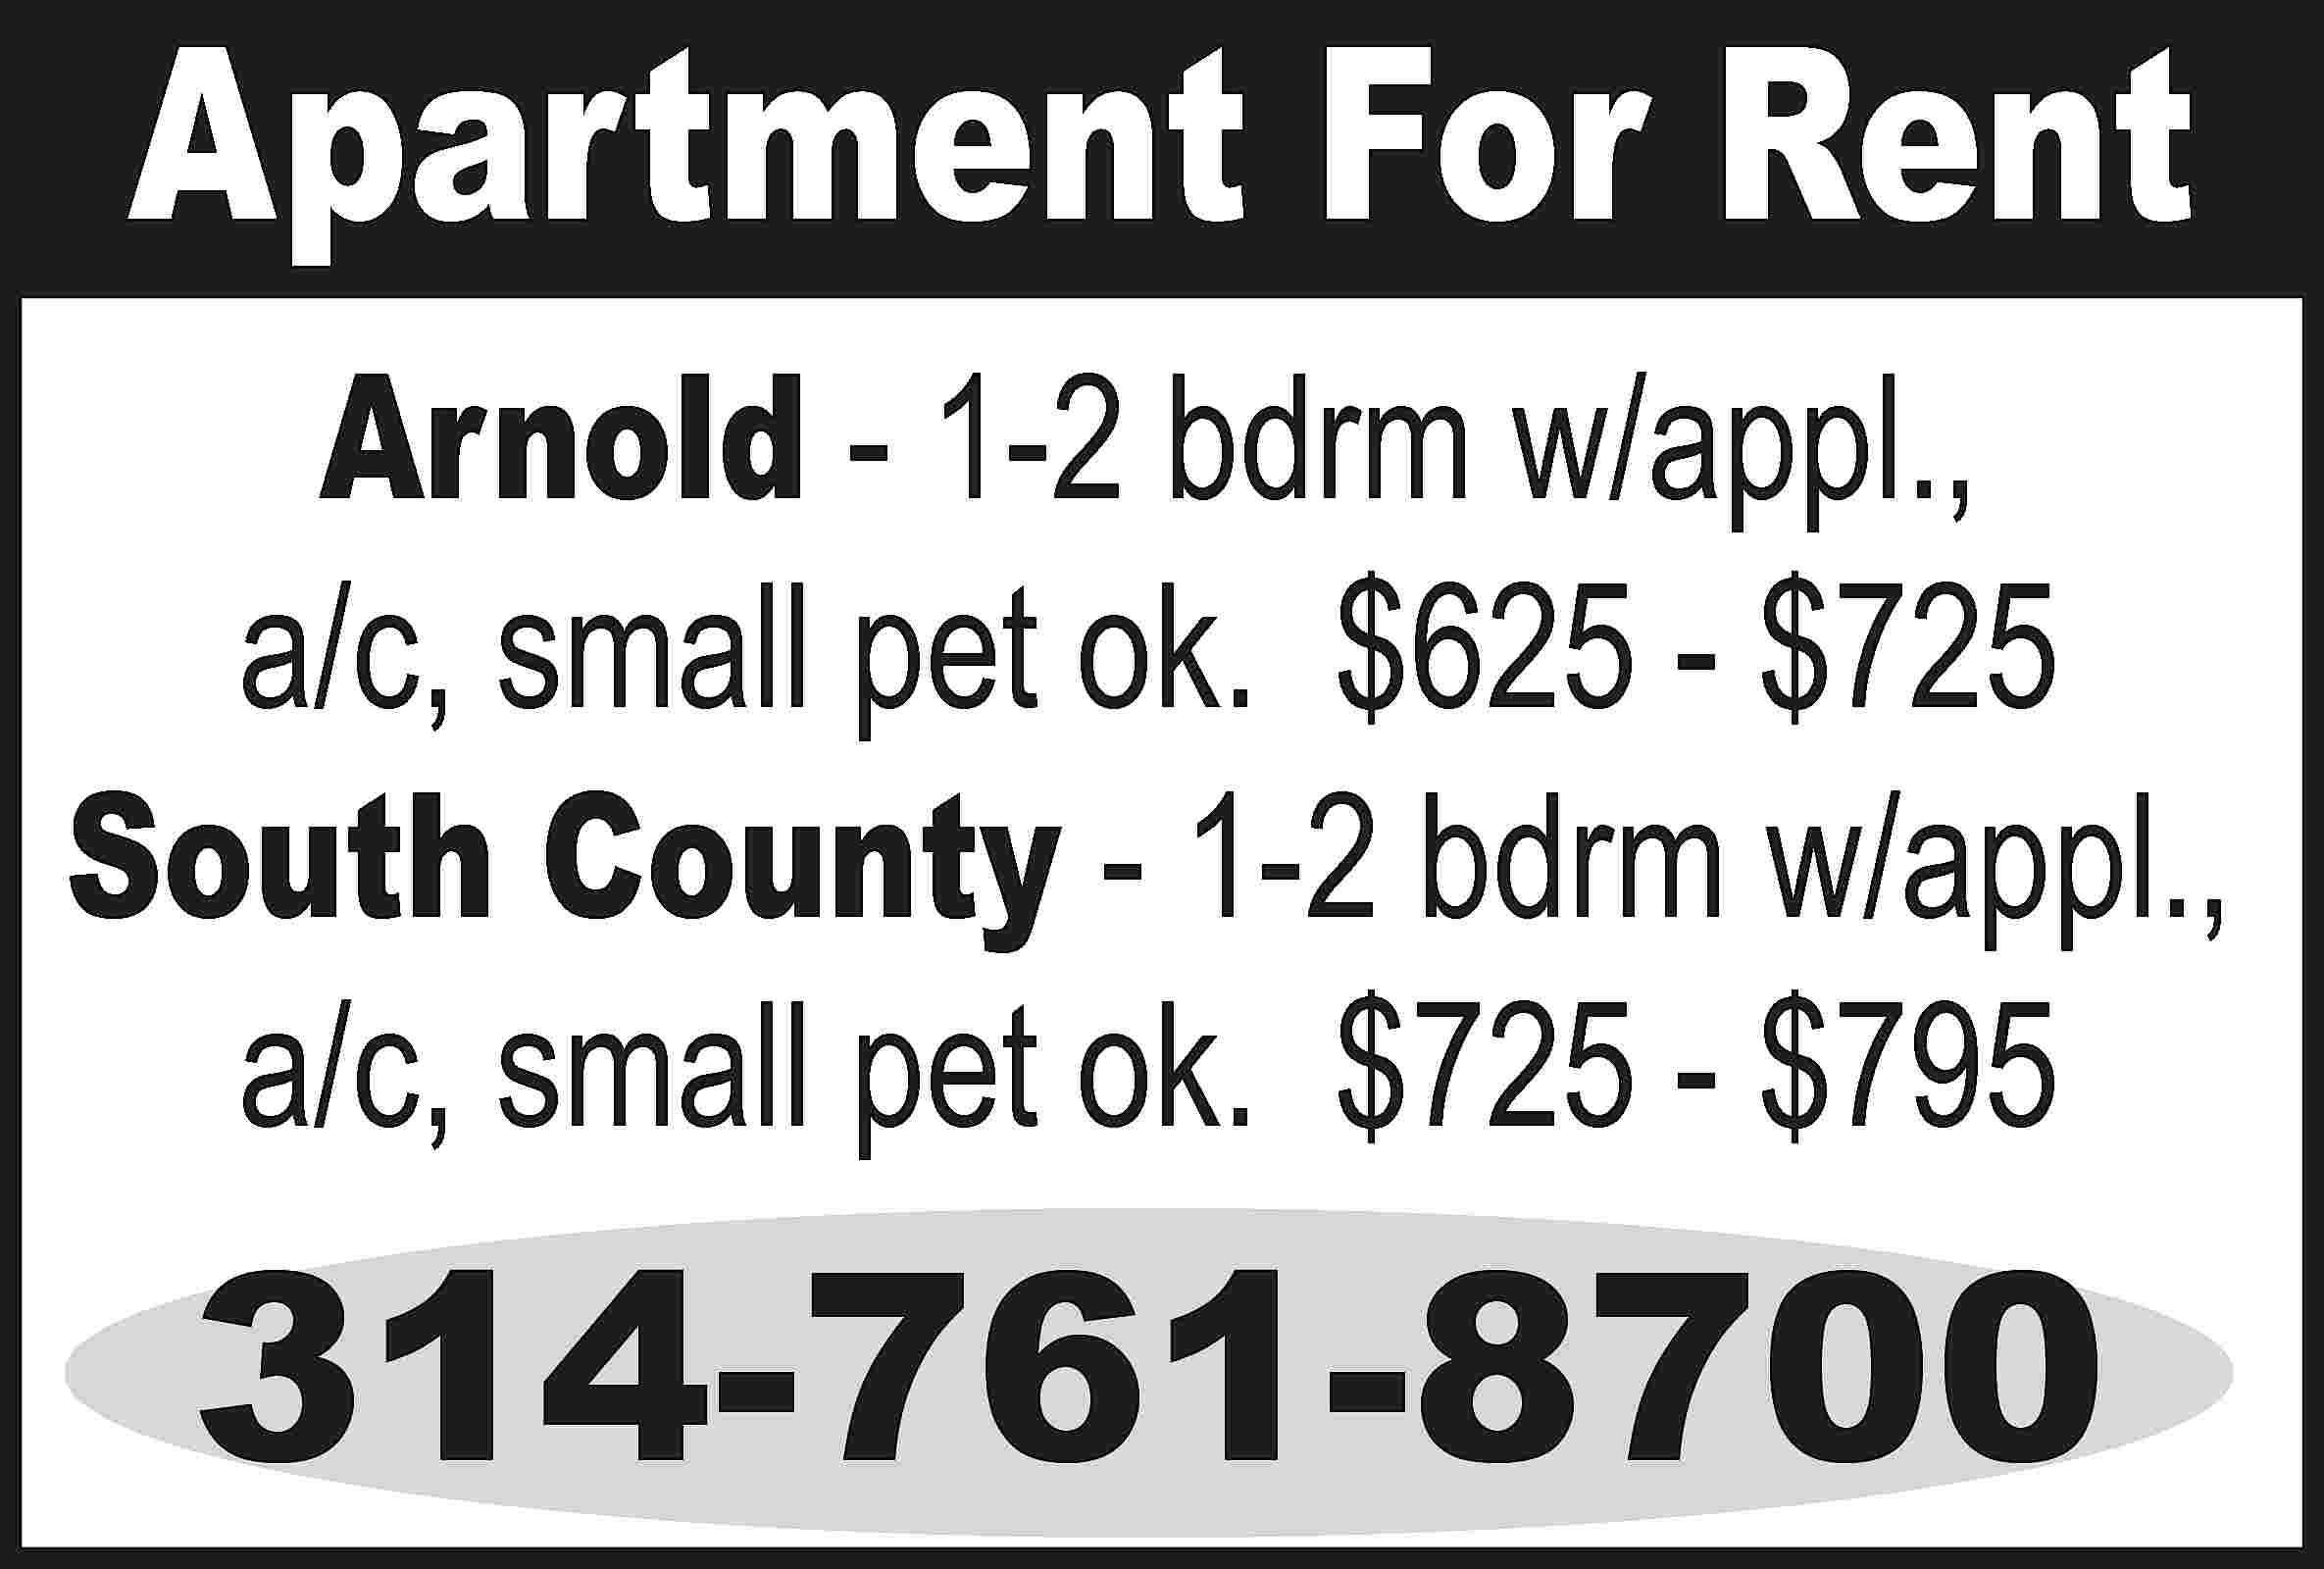 Apartment For Rent Arnold -  Apartment For Rent Arnold - 1-2 bdrm w/appl., a/c, small pet ok. $625 - $725 South County - 1-2 bdrm w/appl., a/c, small pet ok. $725 - $795 314-761-8700